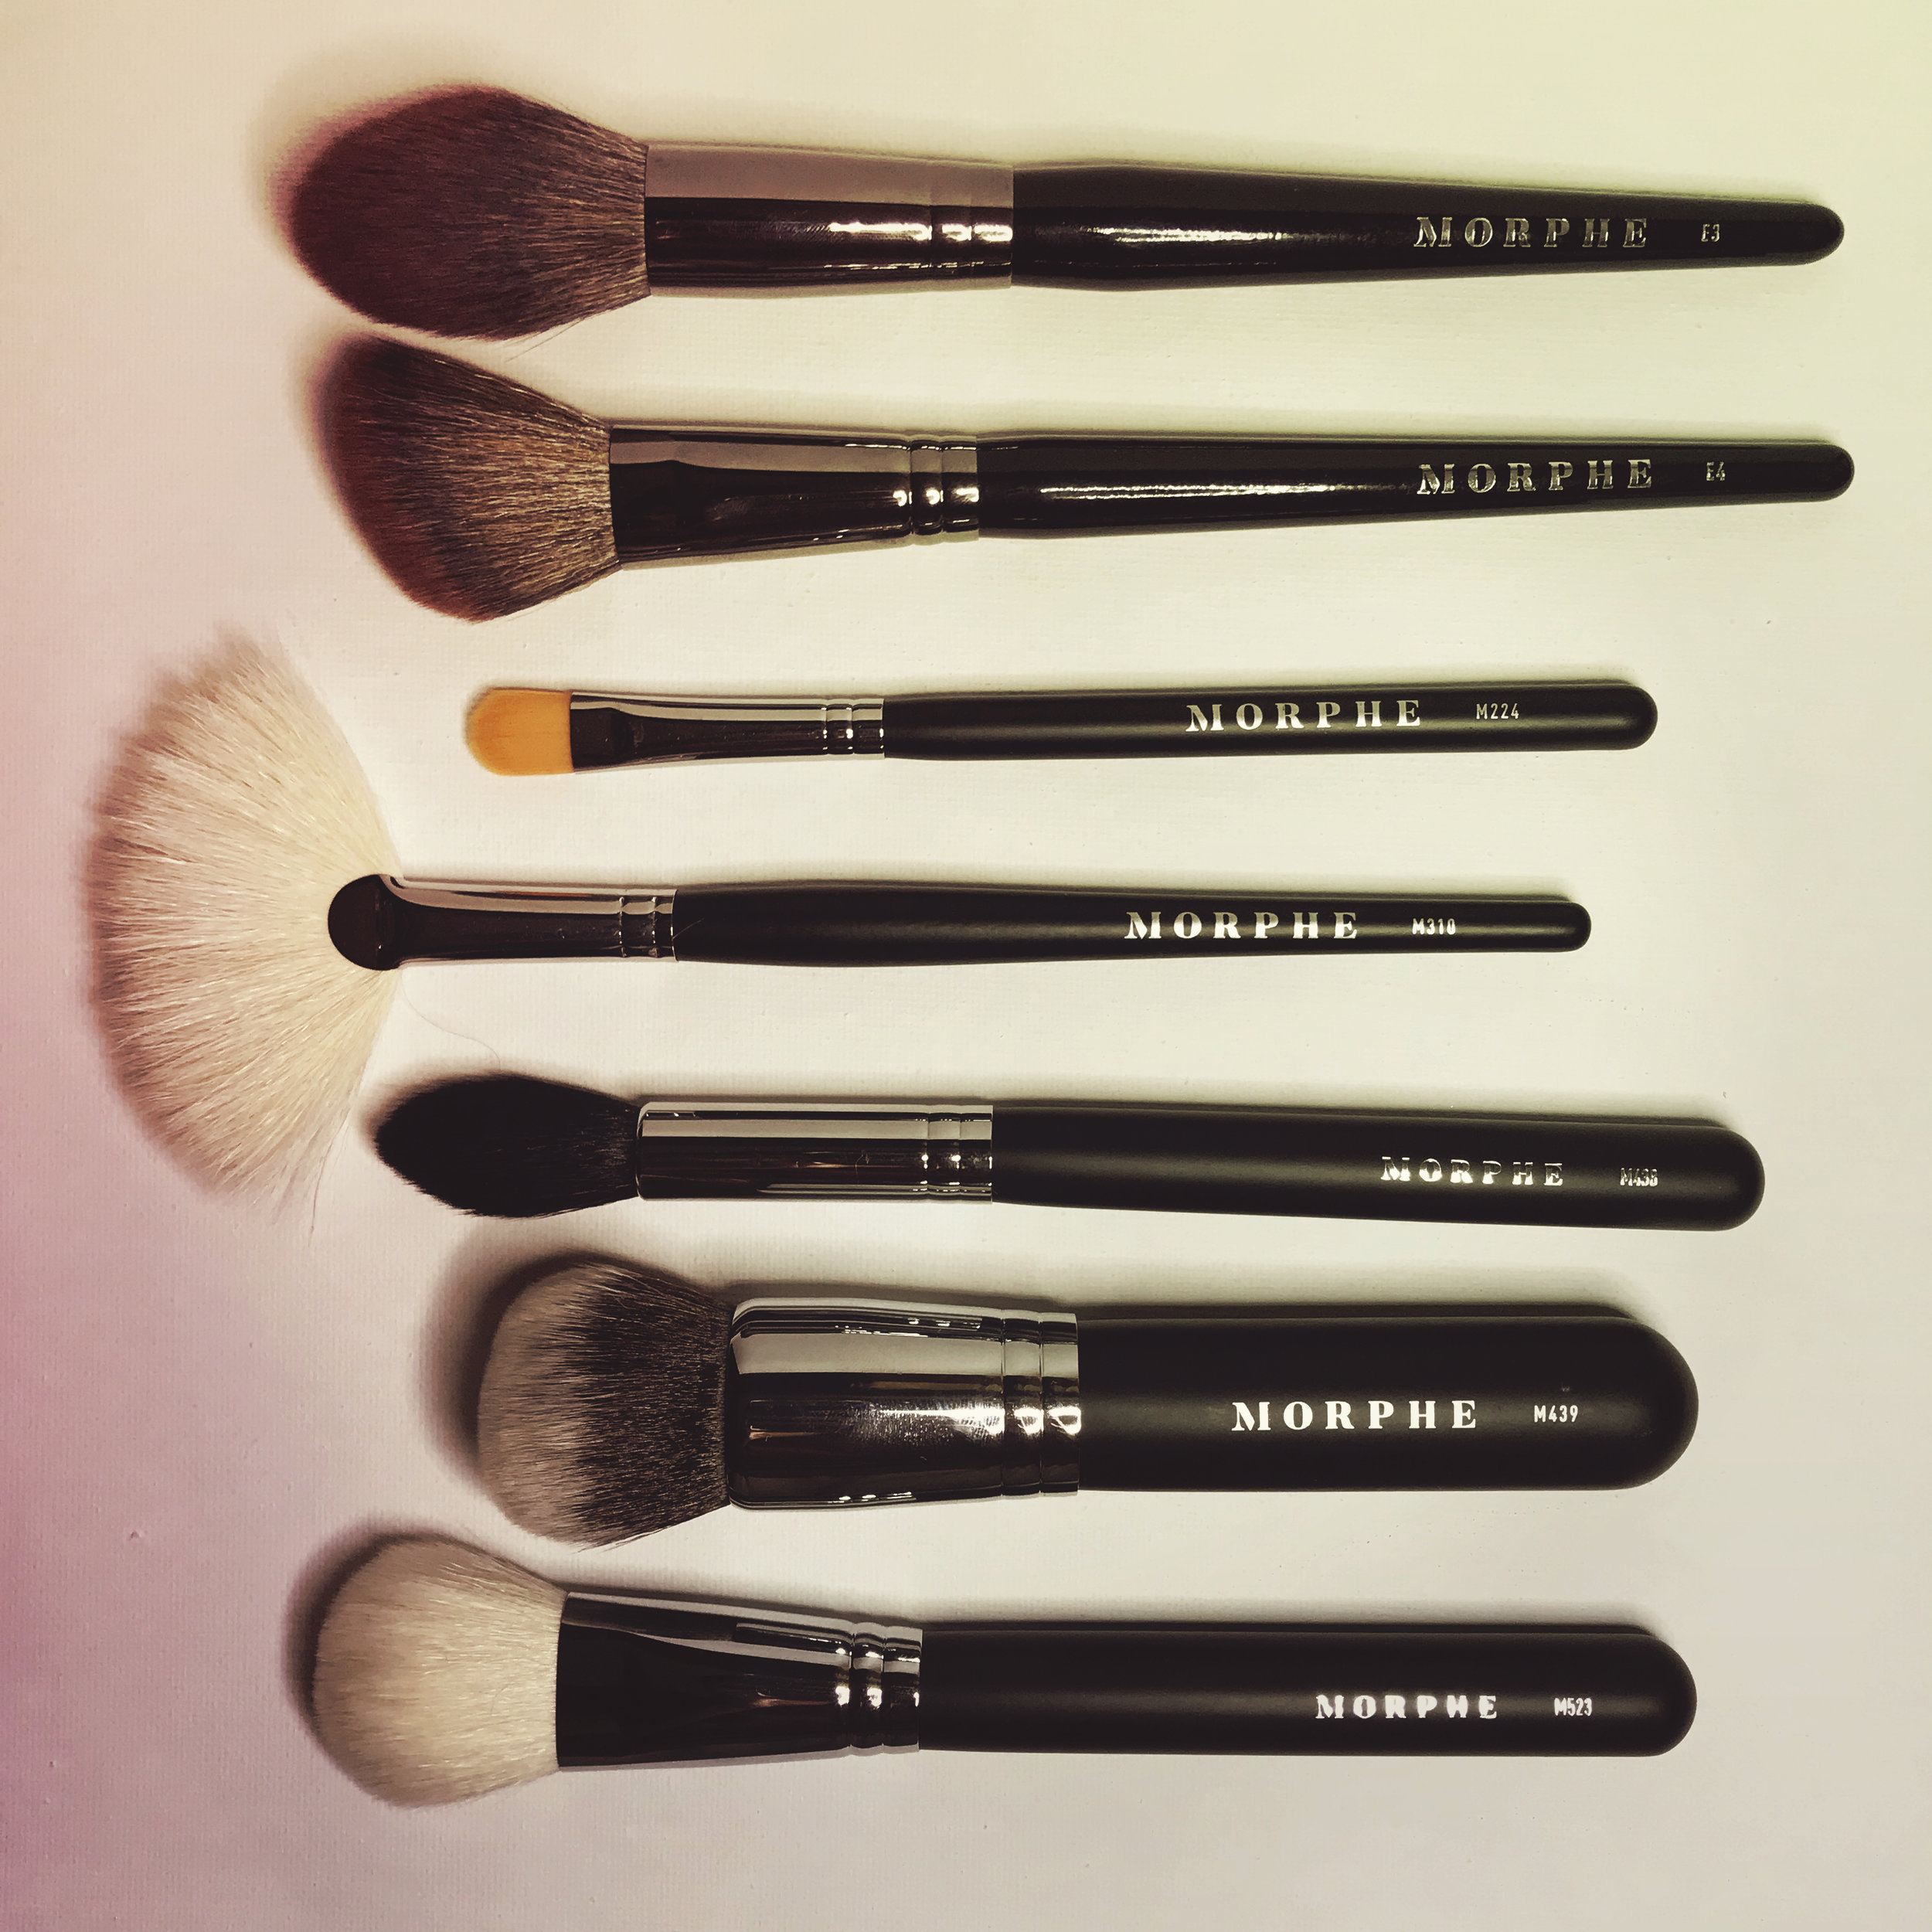 My Favorite Make-Up set! — Feed Your Flaws